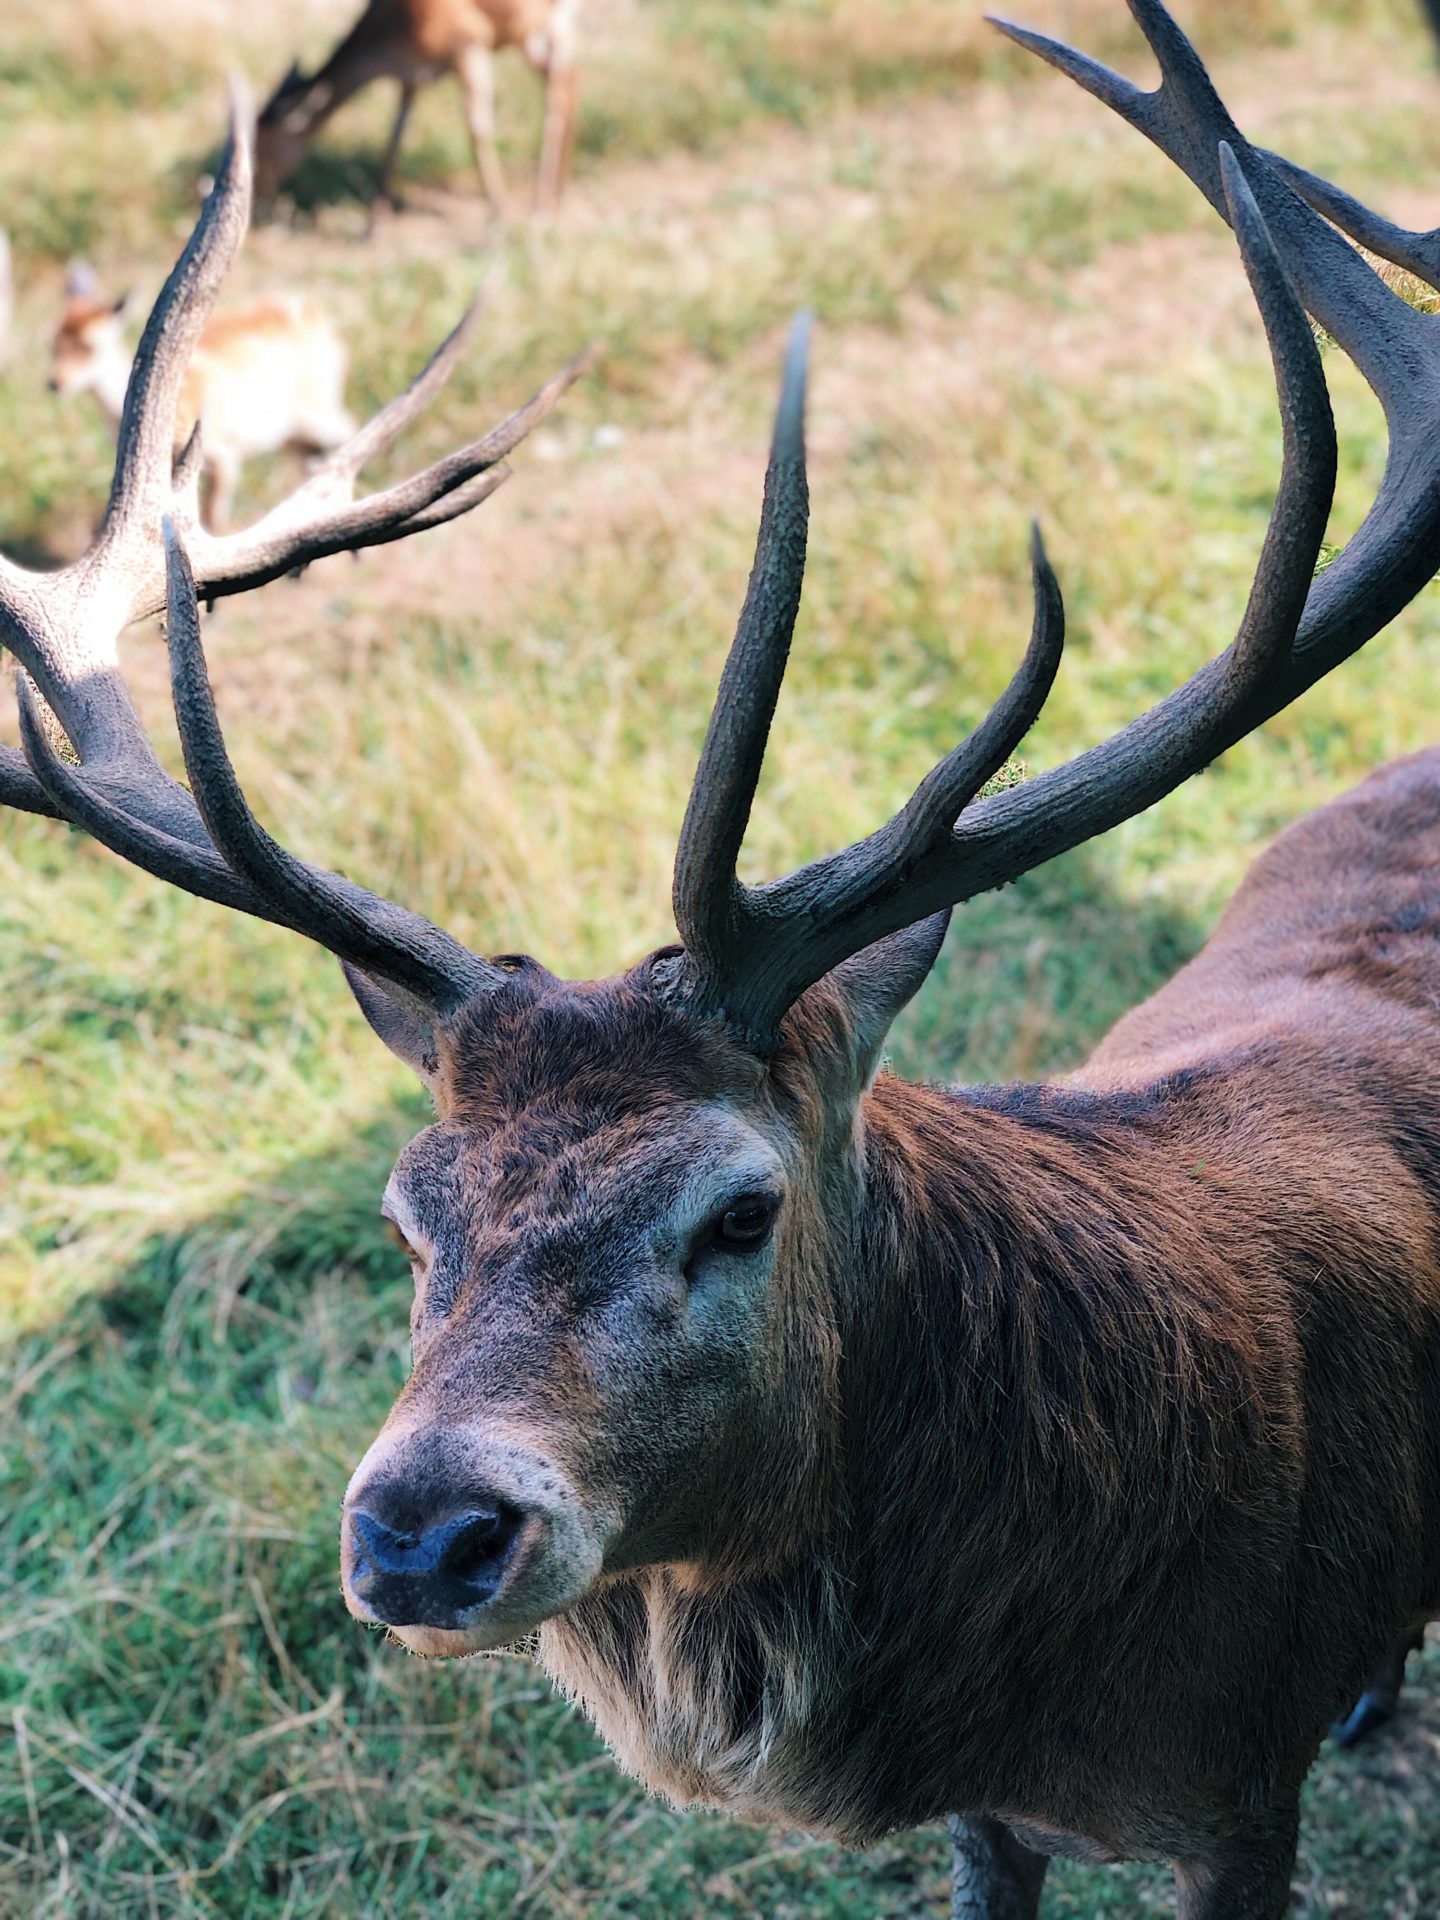 Bucklebury Farm and Deer Park - Best days out in Berkshire